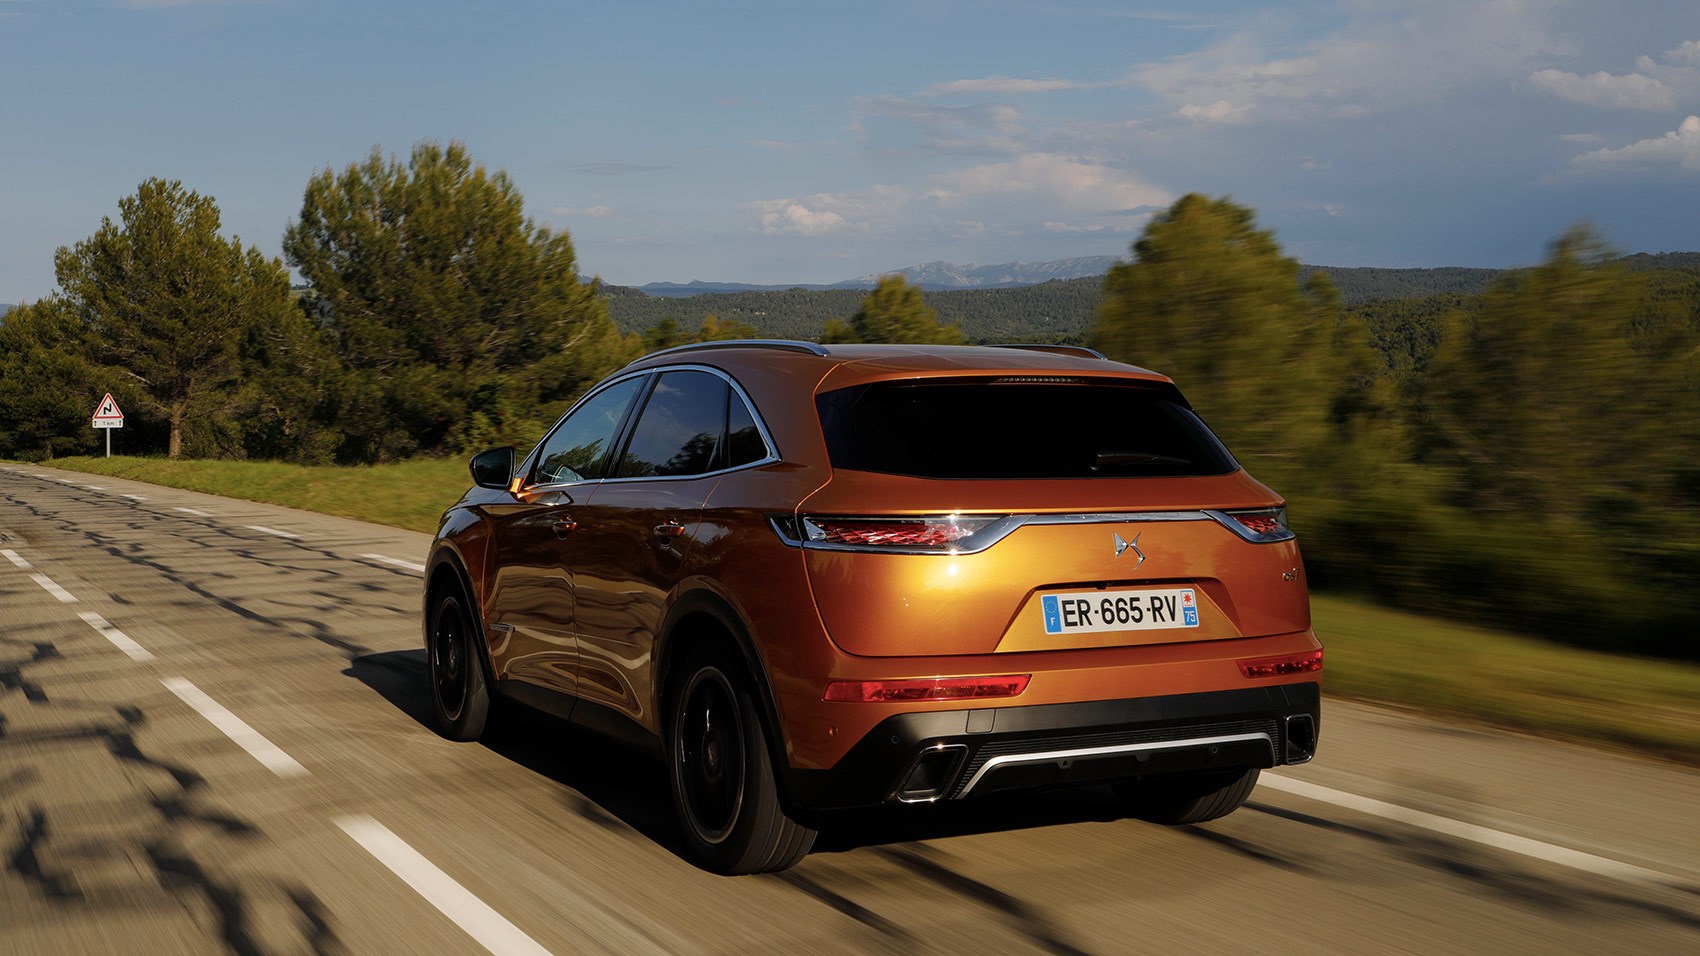 DS7 Crossback (2018) review, prices, specs | CAR Magazine